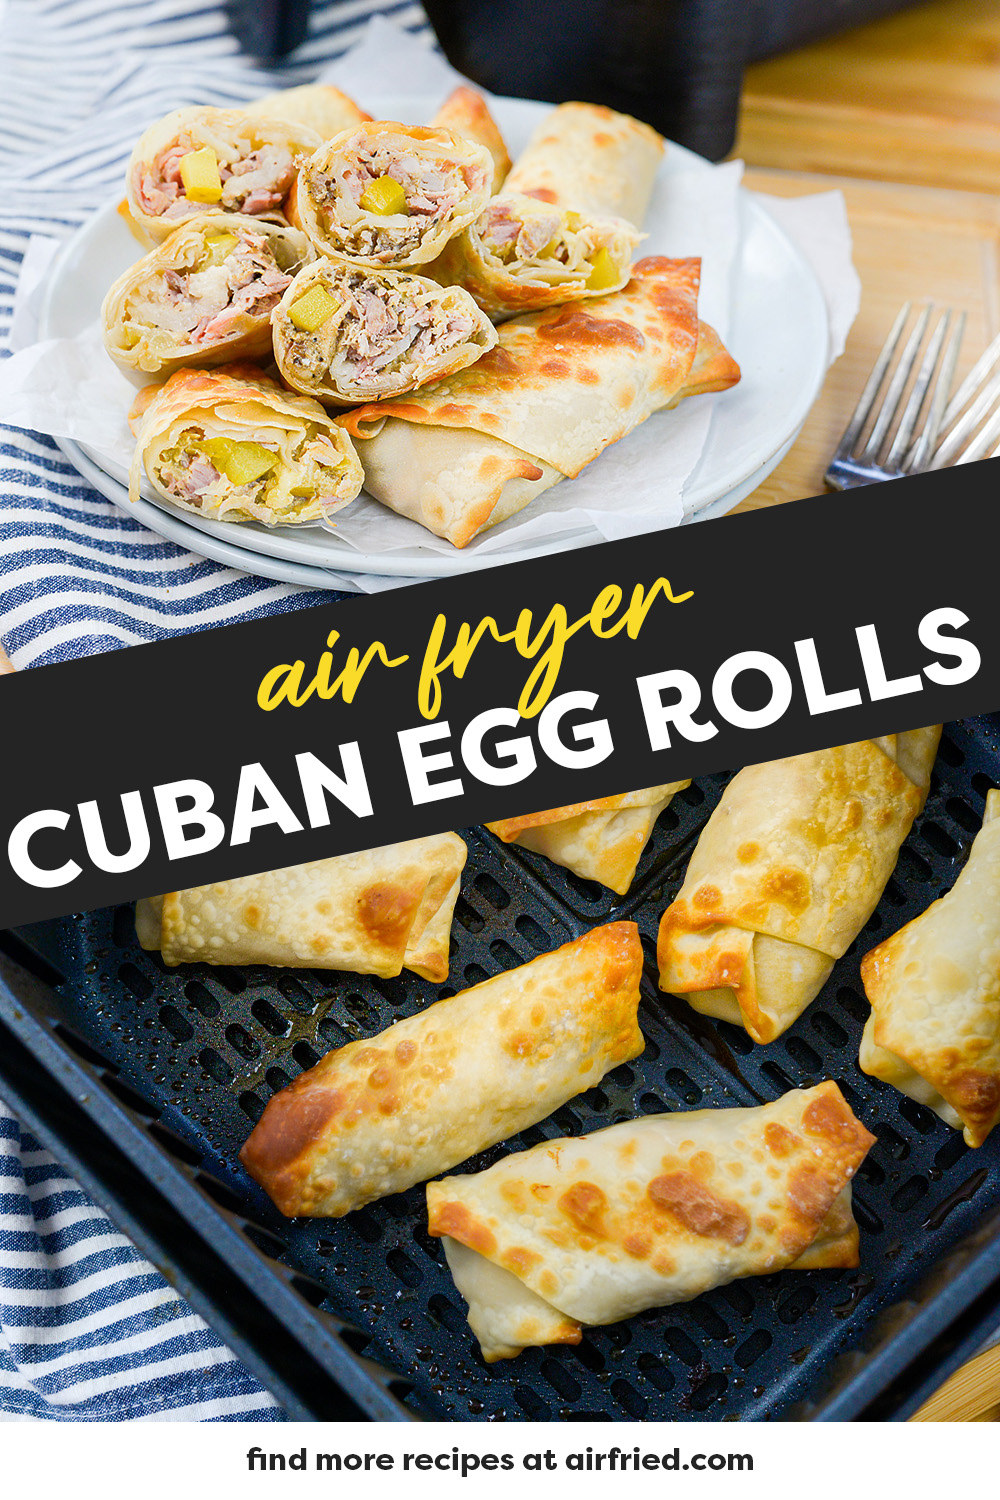 These crispy Cuban egg rolls are super easy to make in the air fryer!